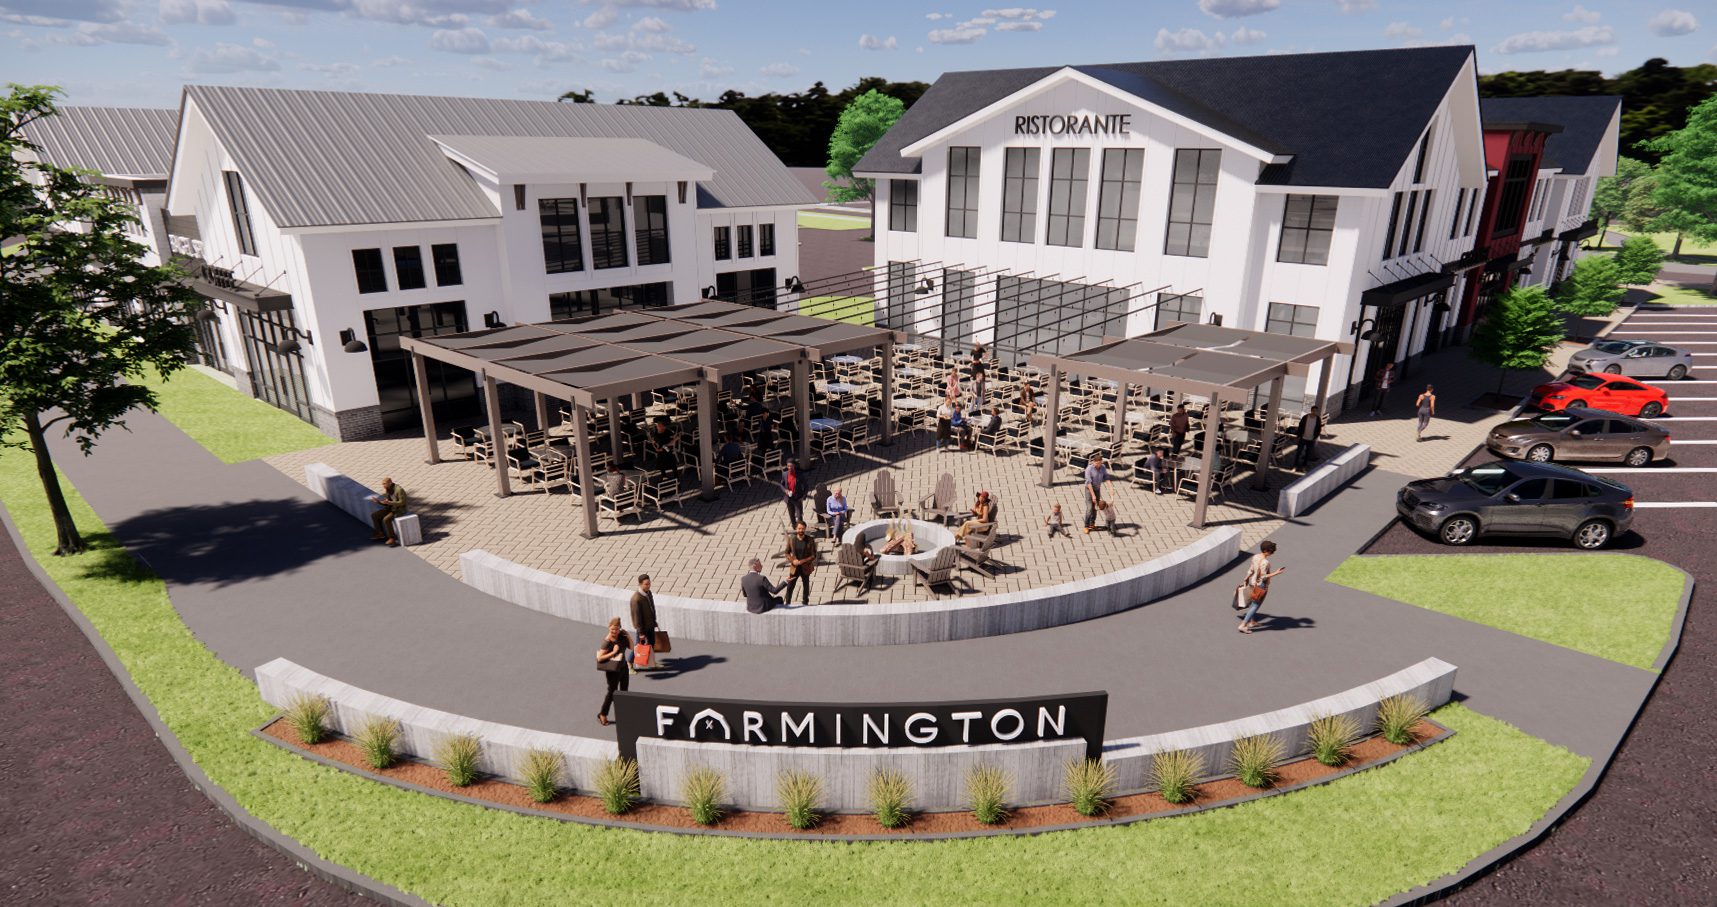 Farmington Village Center rendering white buildings with dark metal roof and people sitting in outdoor seating area